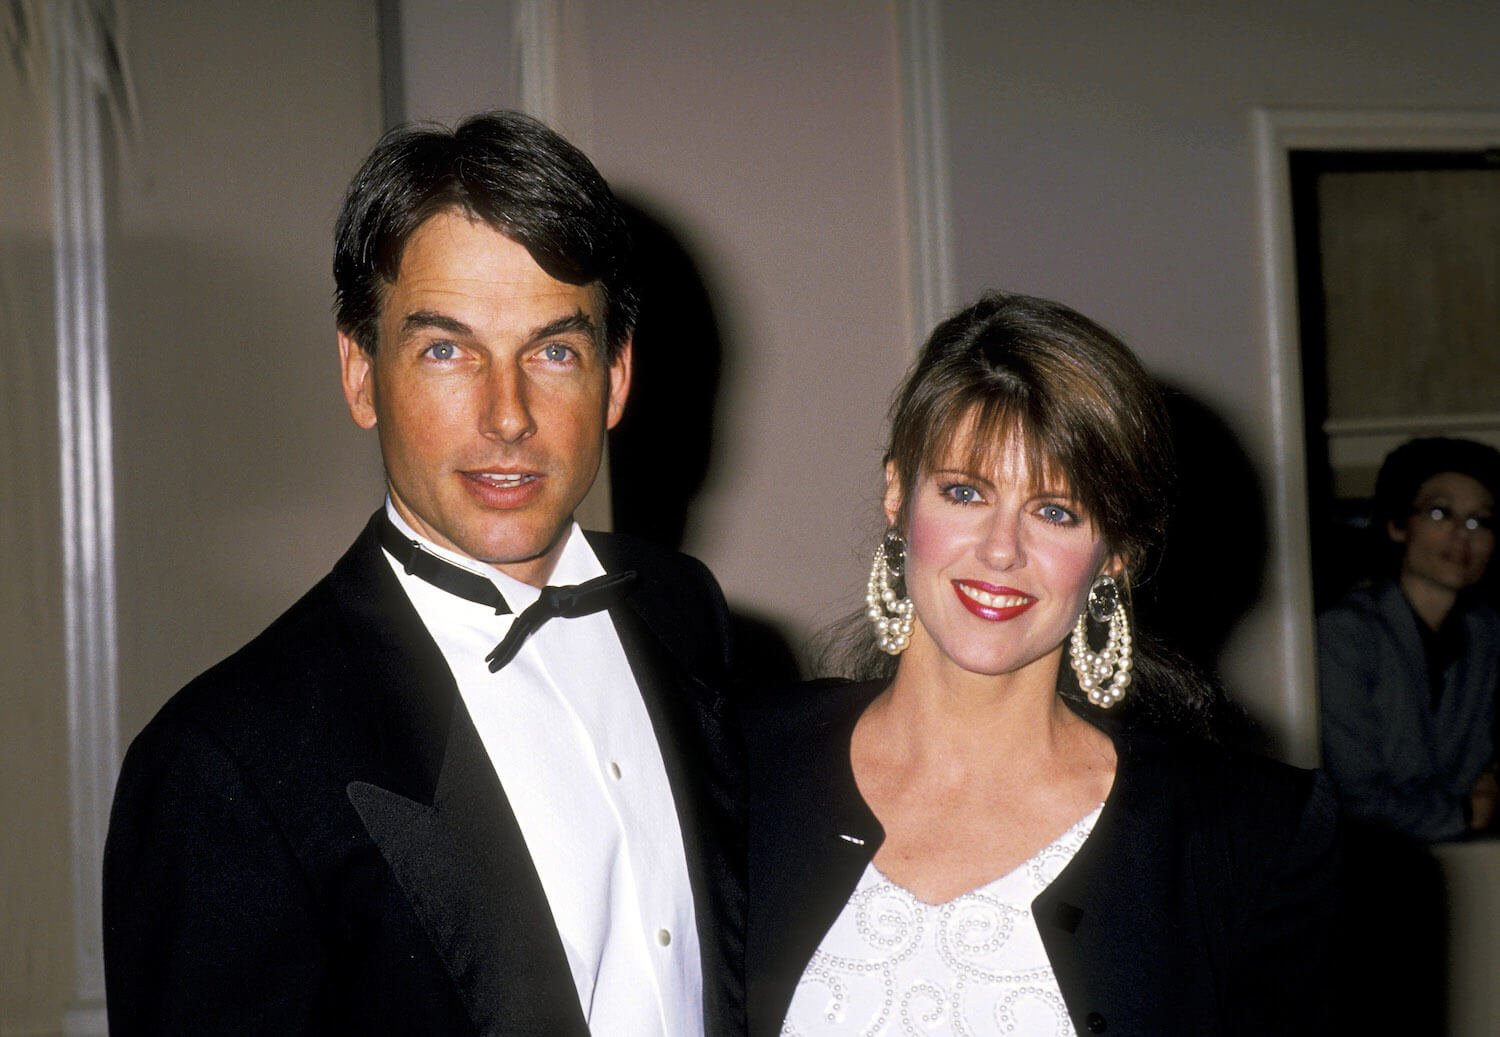 'NCIS' star Mark Harmon and his wife, Pam Dawber, post for a photo while wearing black and white attire